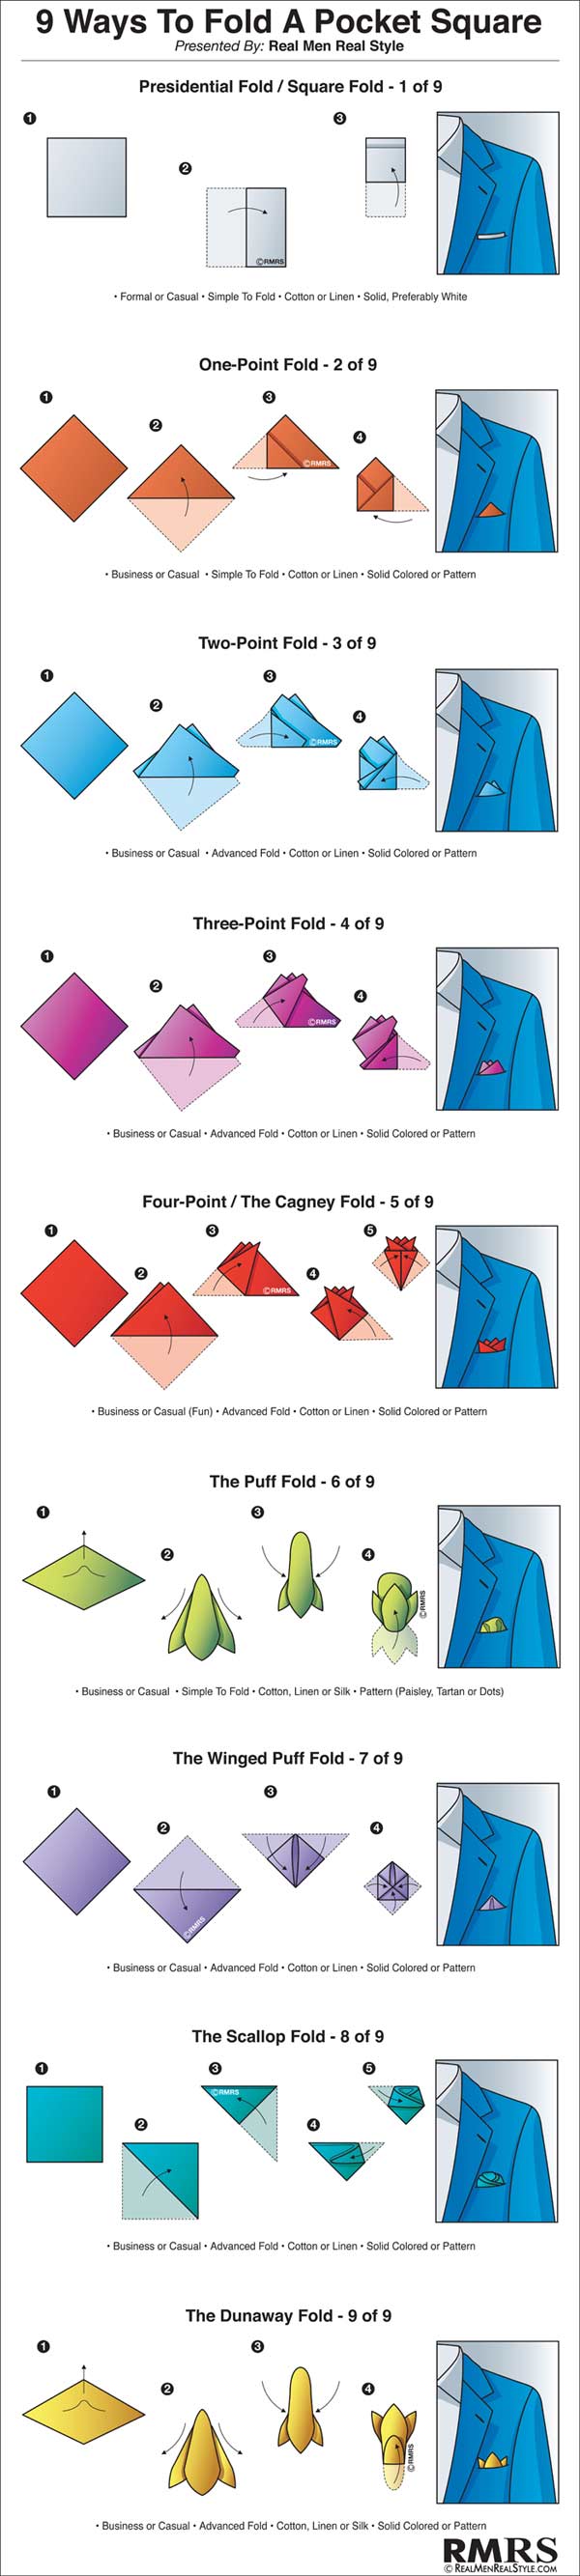 how-to-wear-a-pocket-square